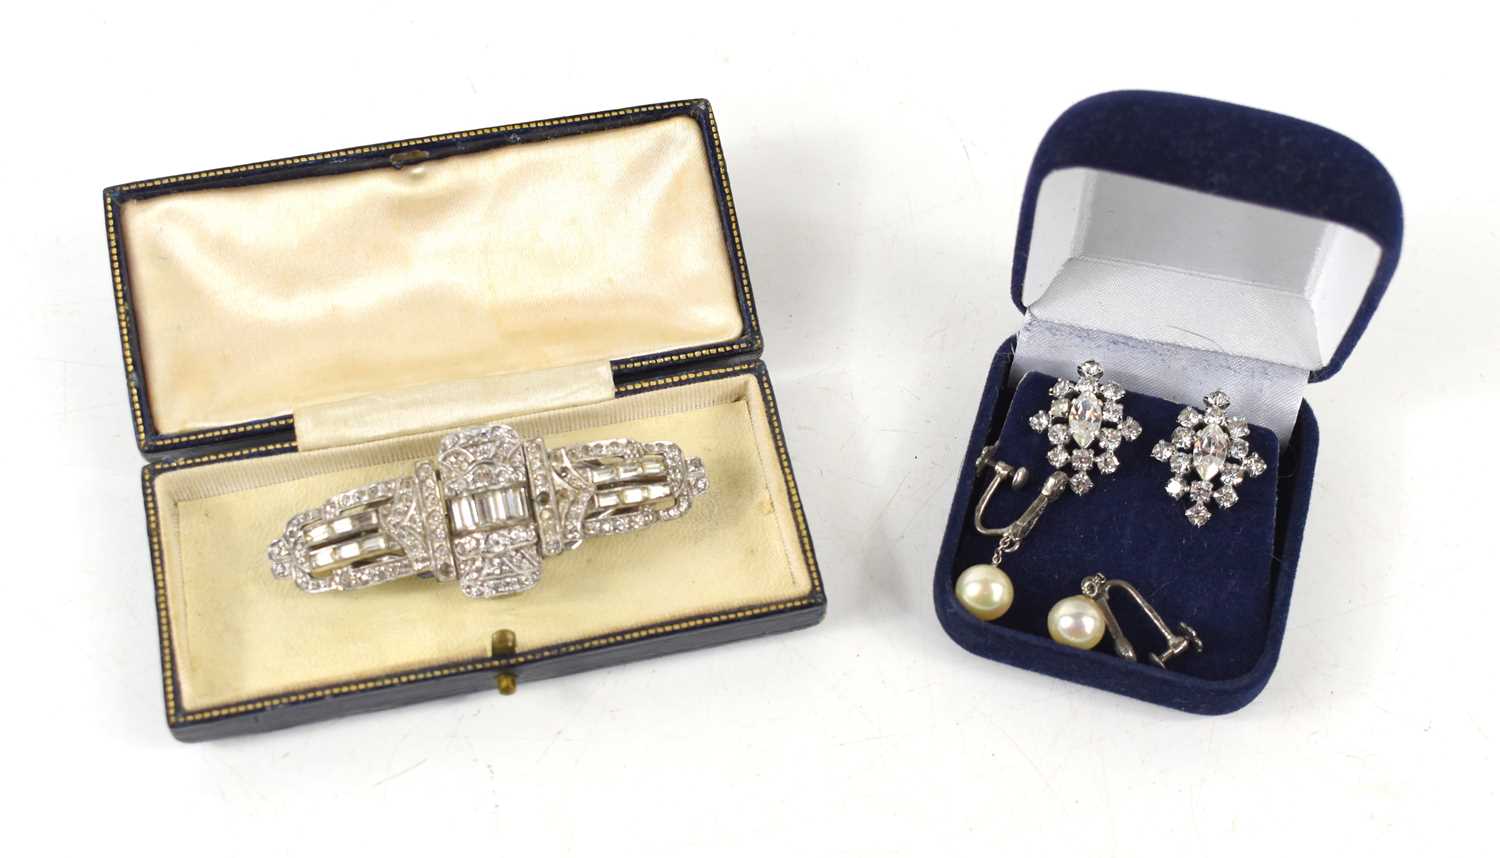 An Art Deco metamorphic dress brooch, inbuilt with a small glass perfume vial, both contained in a